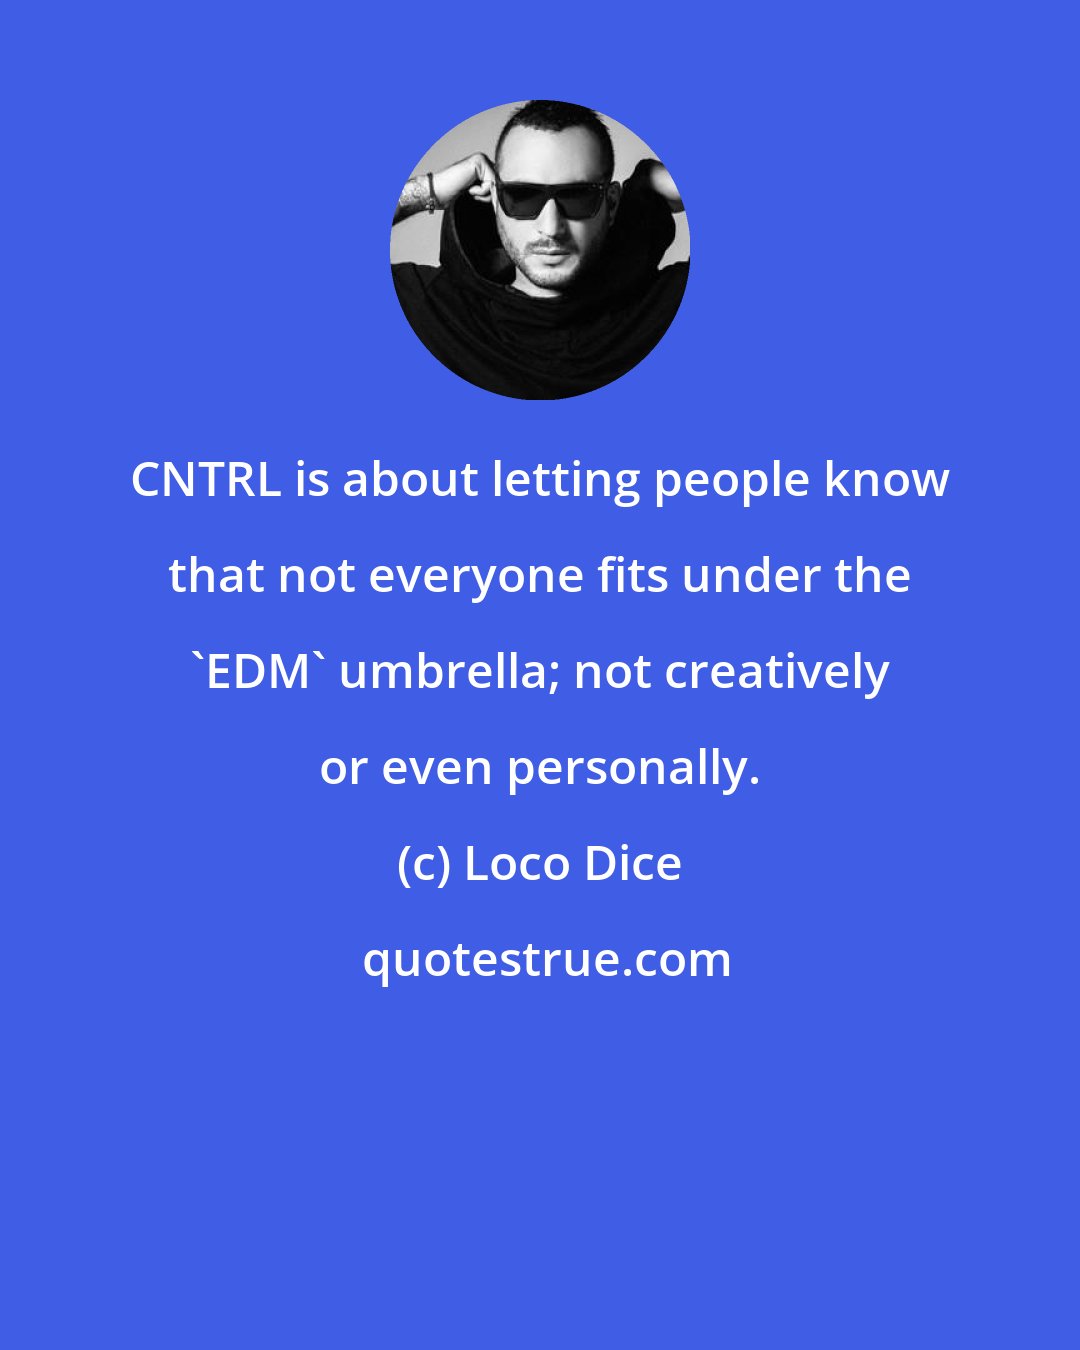 Loco Dice: CNTRL is about letting people know that not everyone fits under the 'EDM' umbrella; not creatively or even personally.